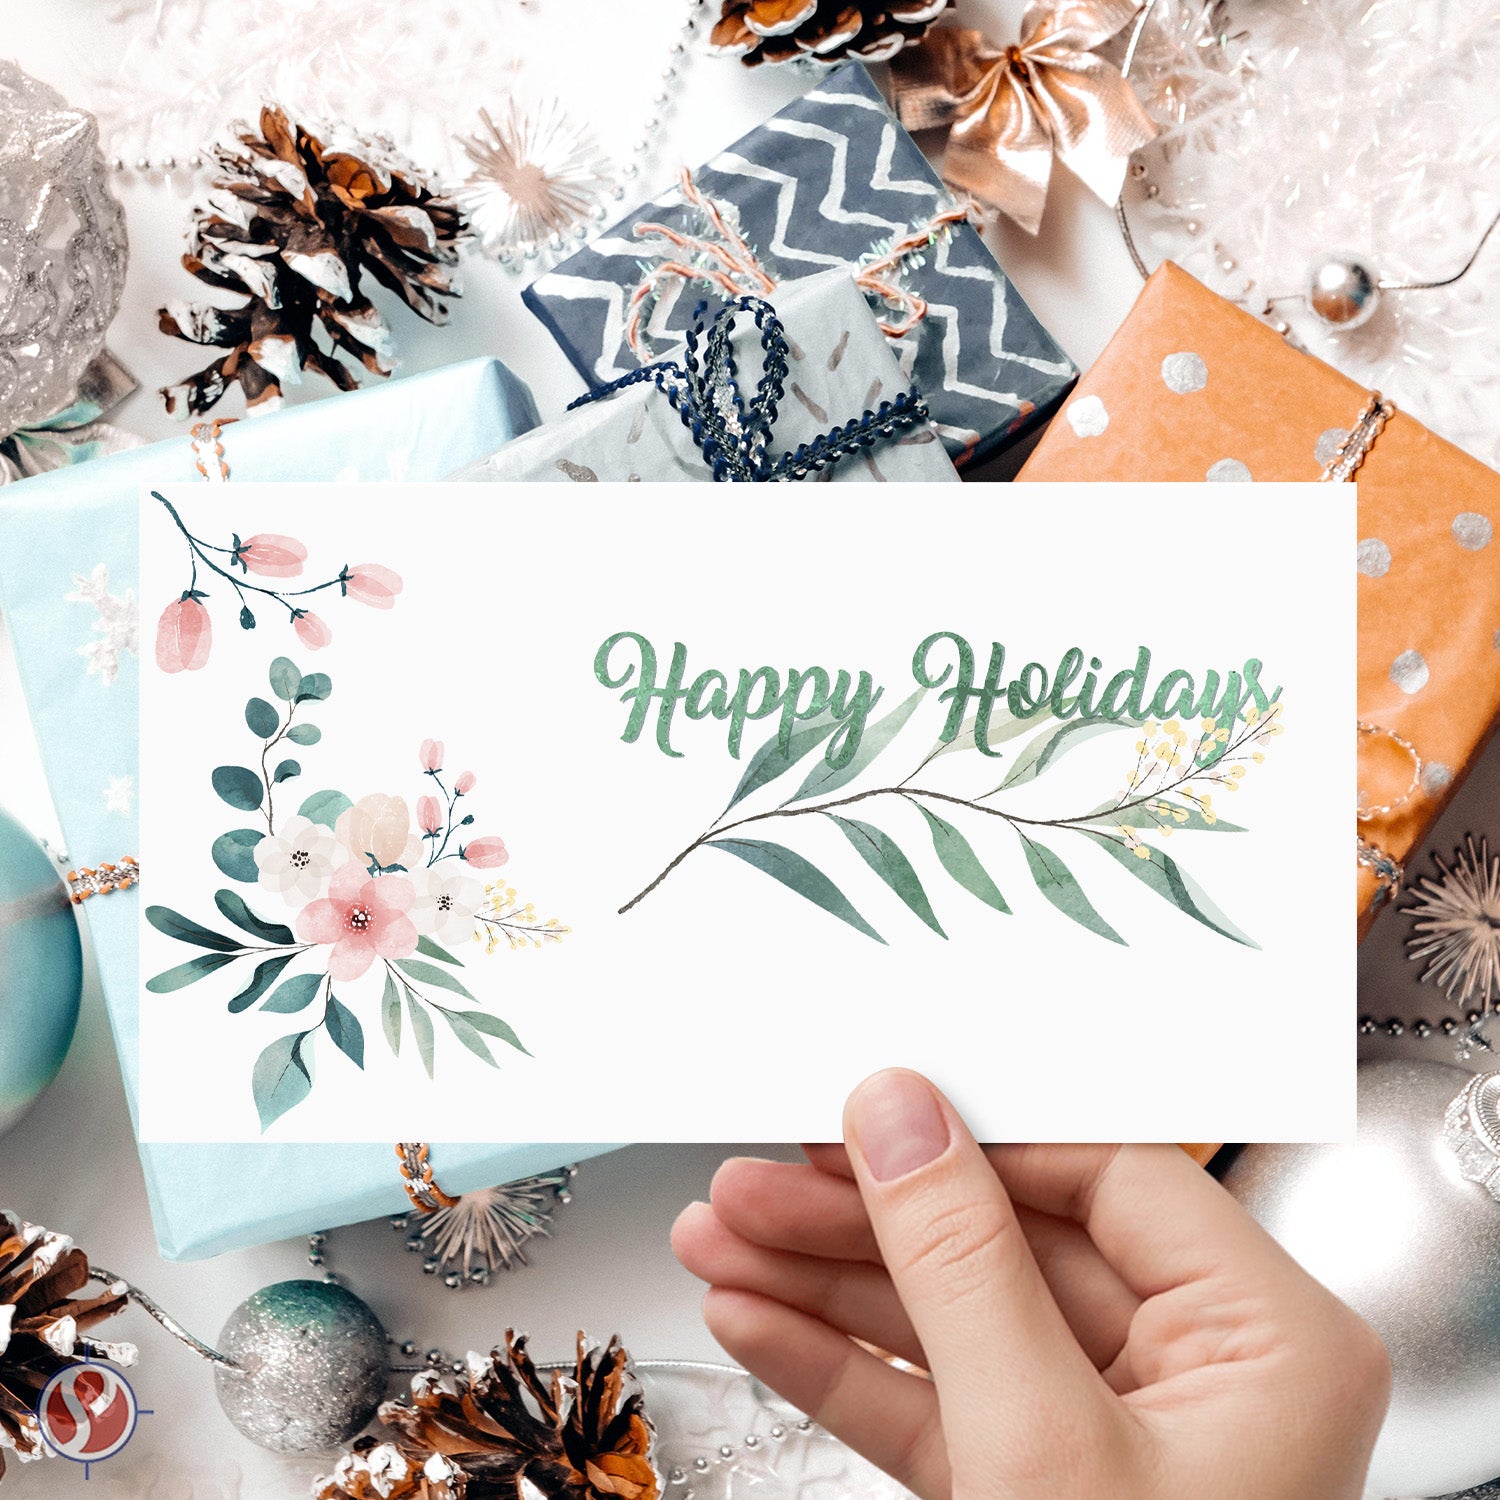 Happy Holidays Cash Envelopes w/ Blank Cards, 3-5/8 x 6-1/2 Inches | 25 per Pack